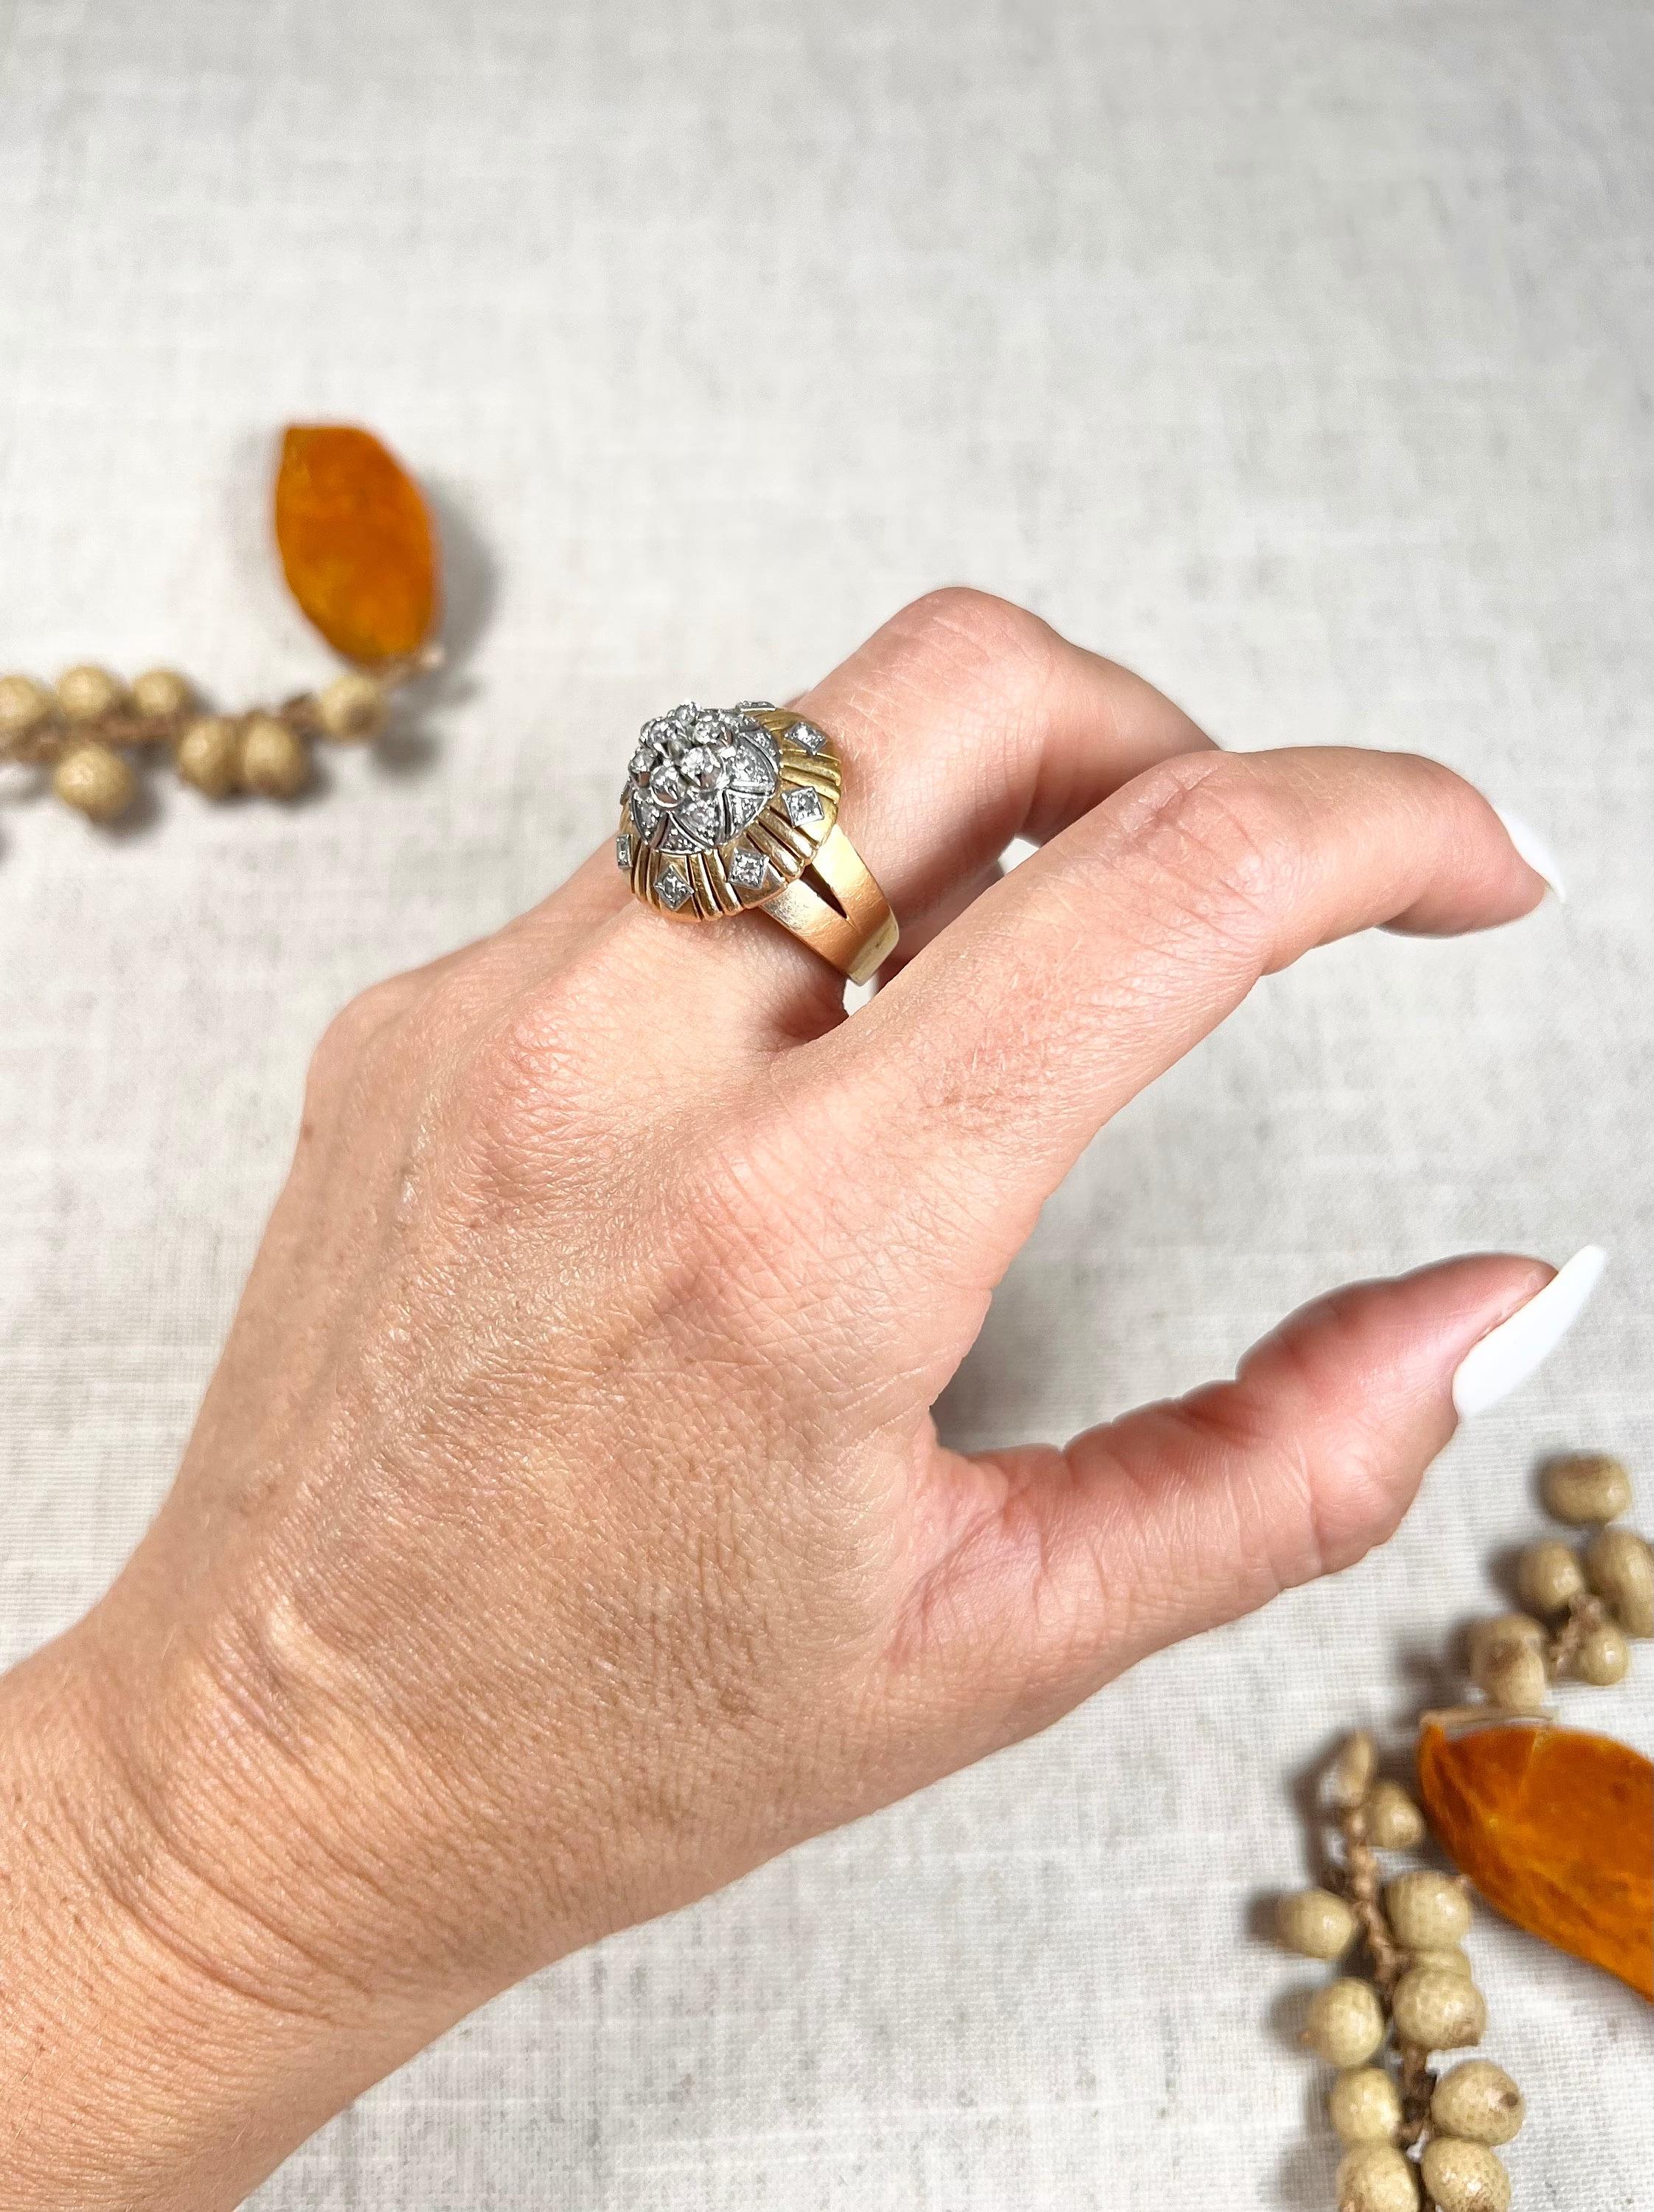 Vintage Diamond Cocktail Ring

18ct Gold Tested 

Circa 1960s

This stunning tiered-dome-shaped cocktail ring is a true vintage gem from the 1960s. Made of 18ct gold and carefully tested, the ring is adorned with approximately 1ct of beautiful